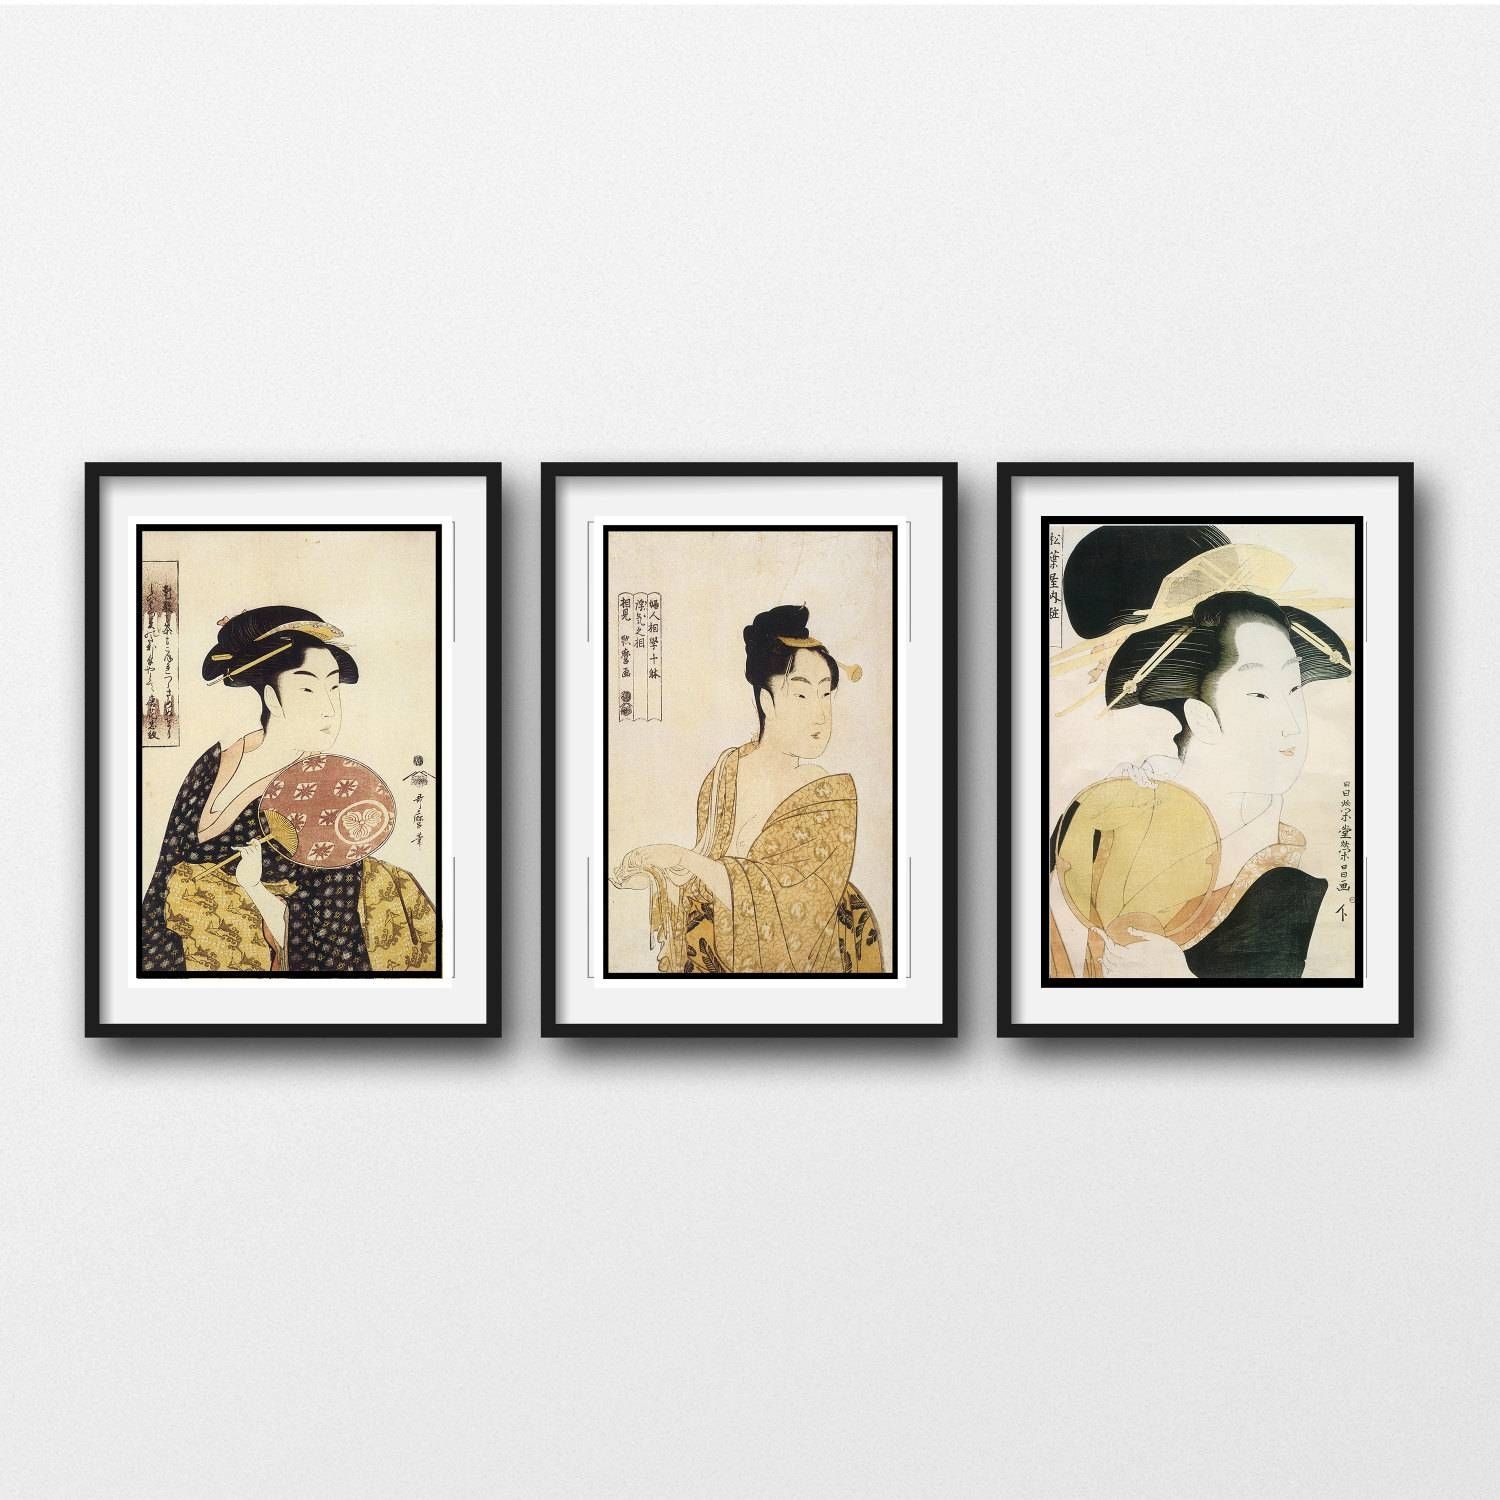 3 Piece Wall Art Vintage Japanese Prints Matted And Framed With 2017 3 Piece Wall Art (View 13 of 30)